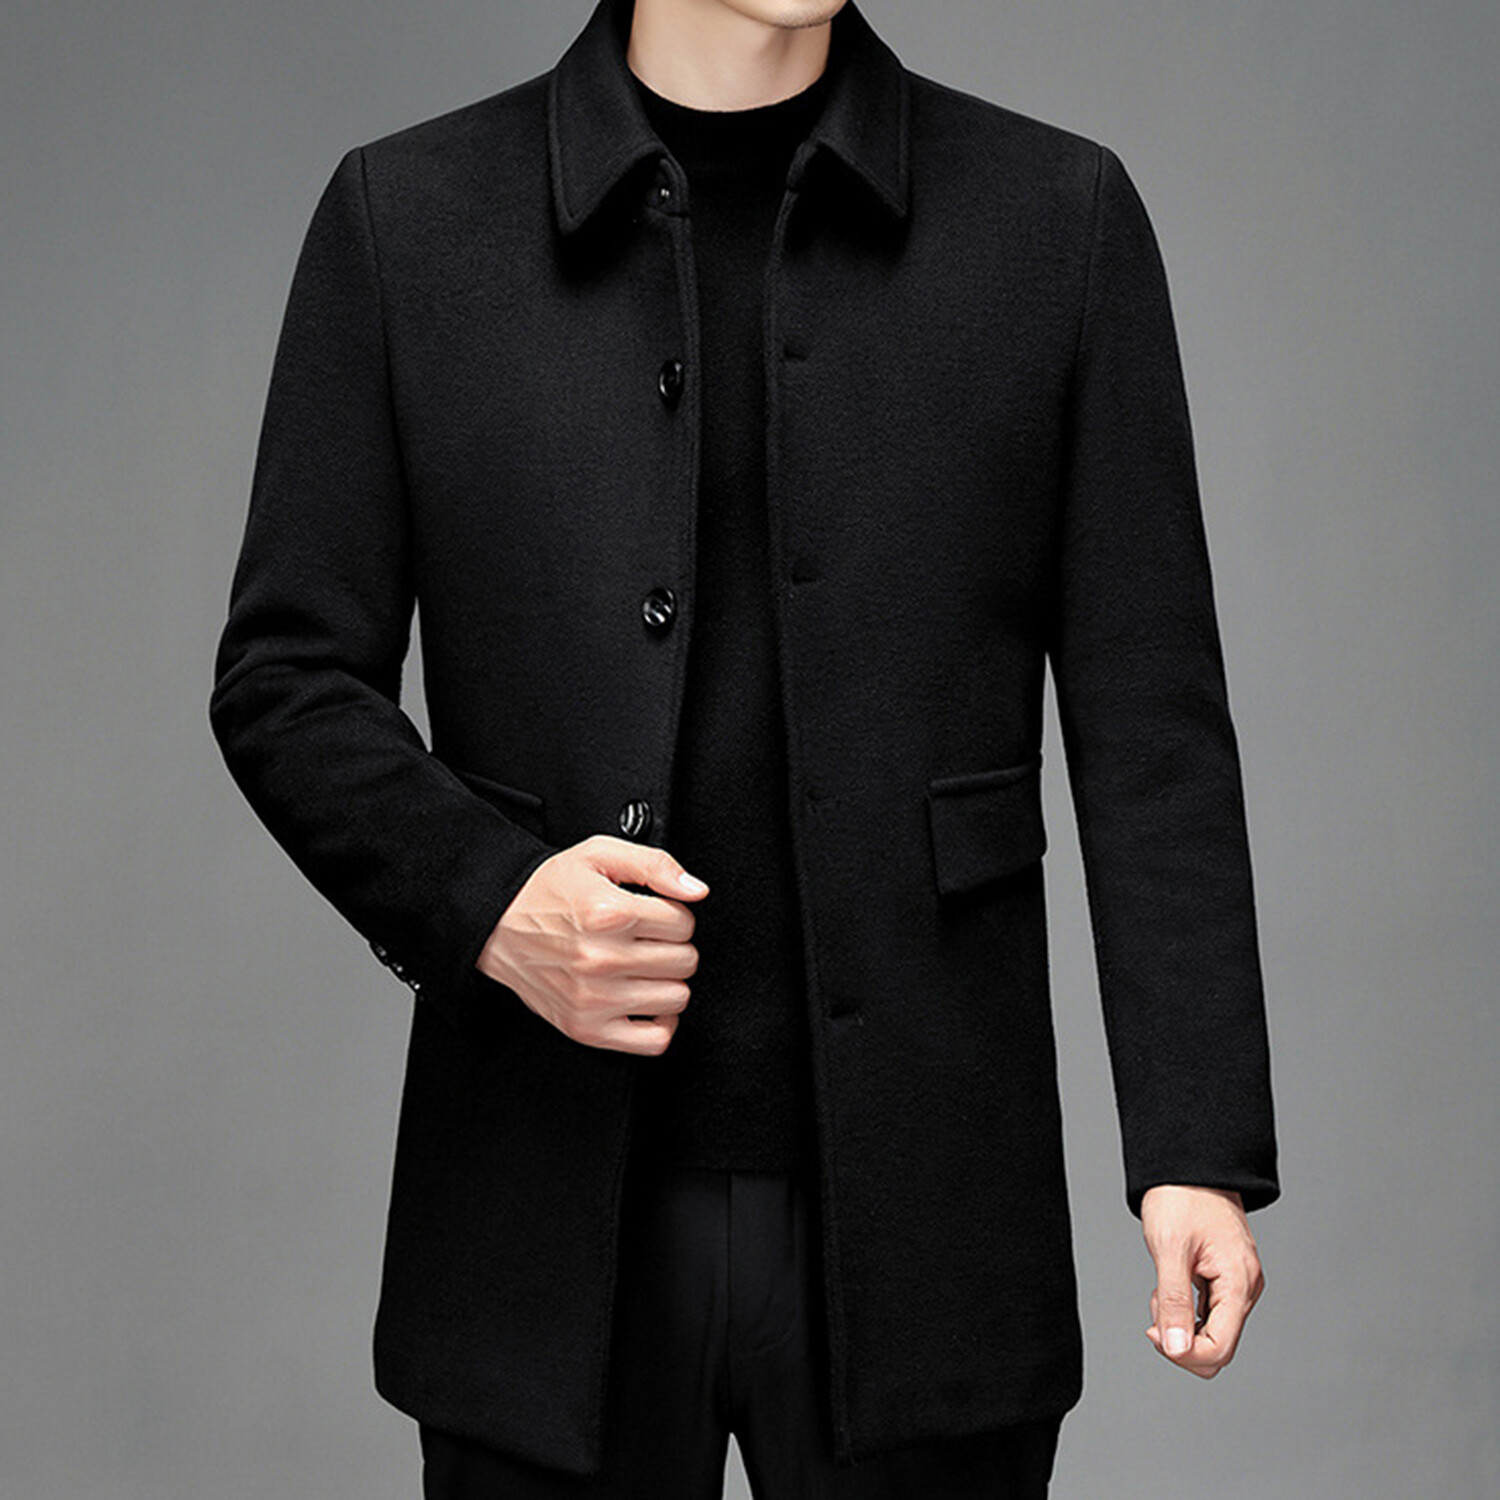 5-Button Up Wool Jacket // Black (XS) - Amedeo Exclusive Jackets ...